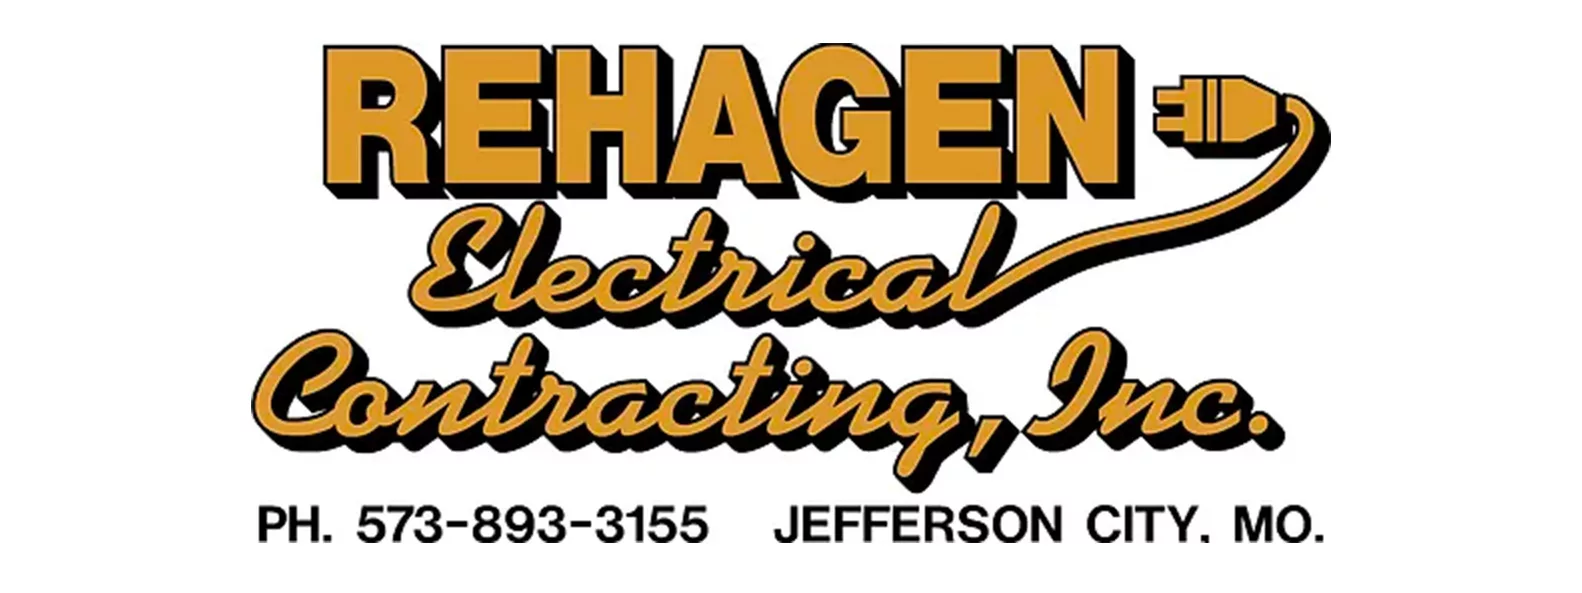 Rehagan Electrical Contracting